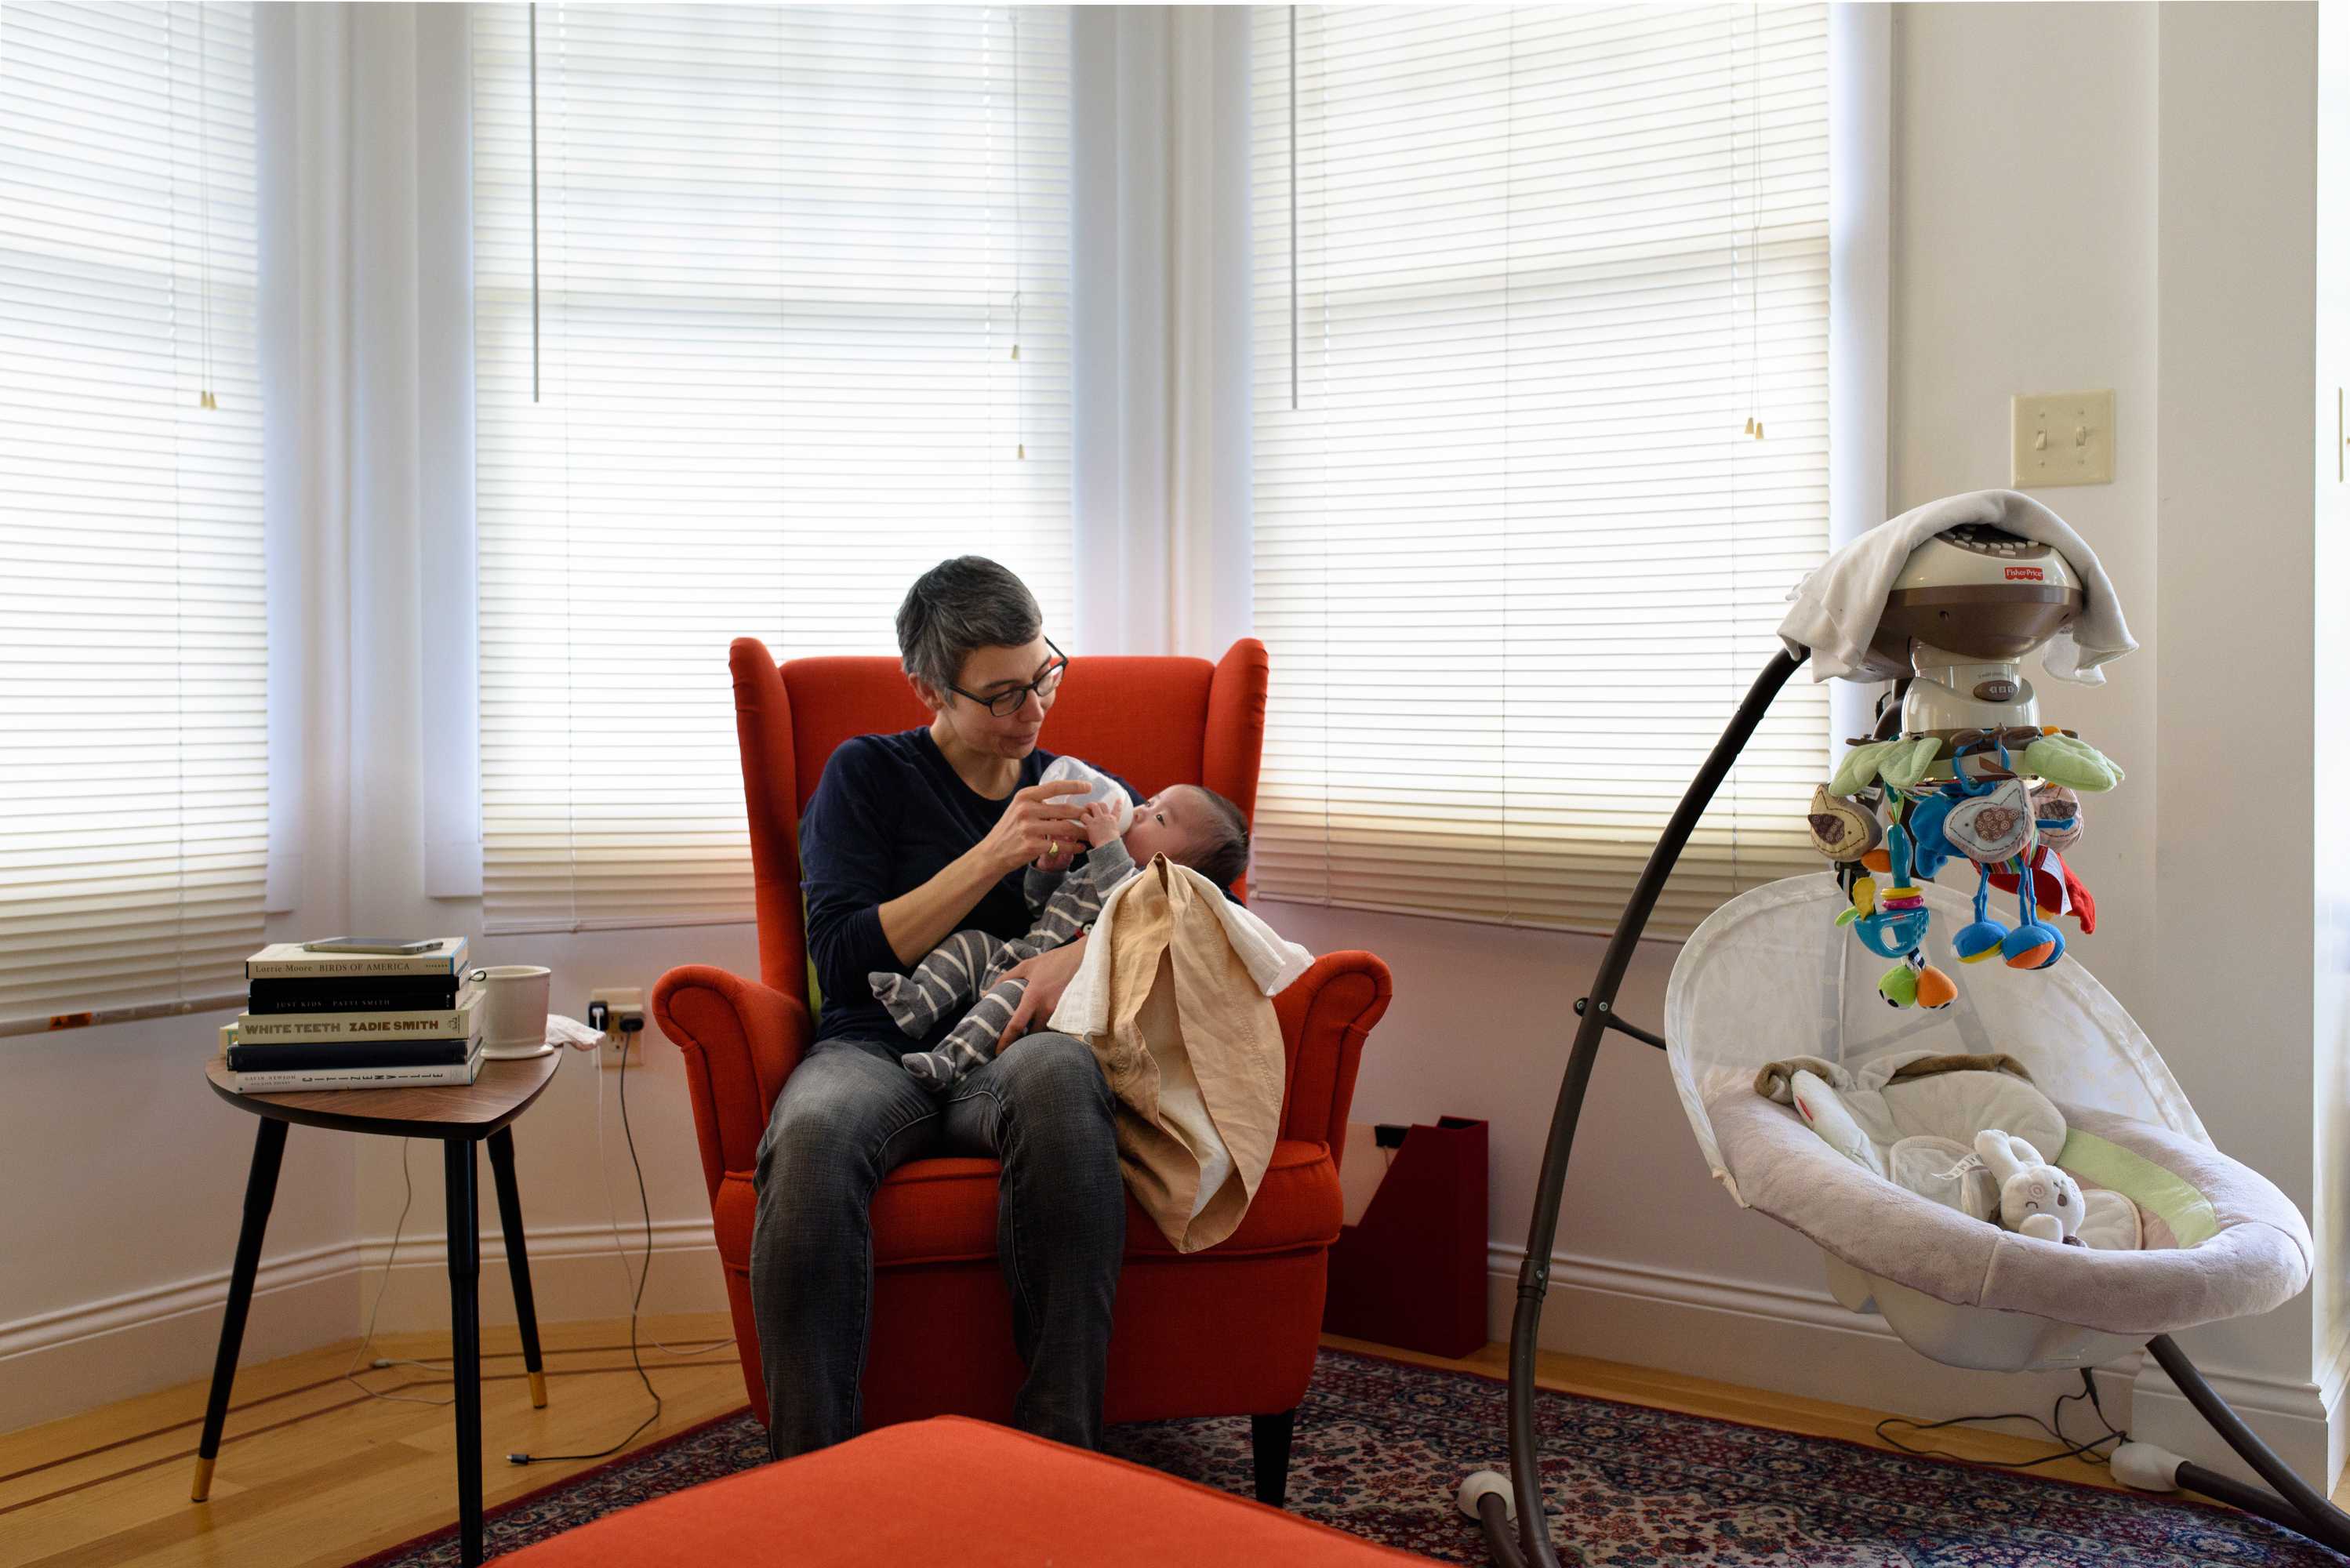 Inger Brinck feeding their four-month old son. They are considering moving out of Oakland as housing costs increase.